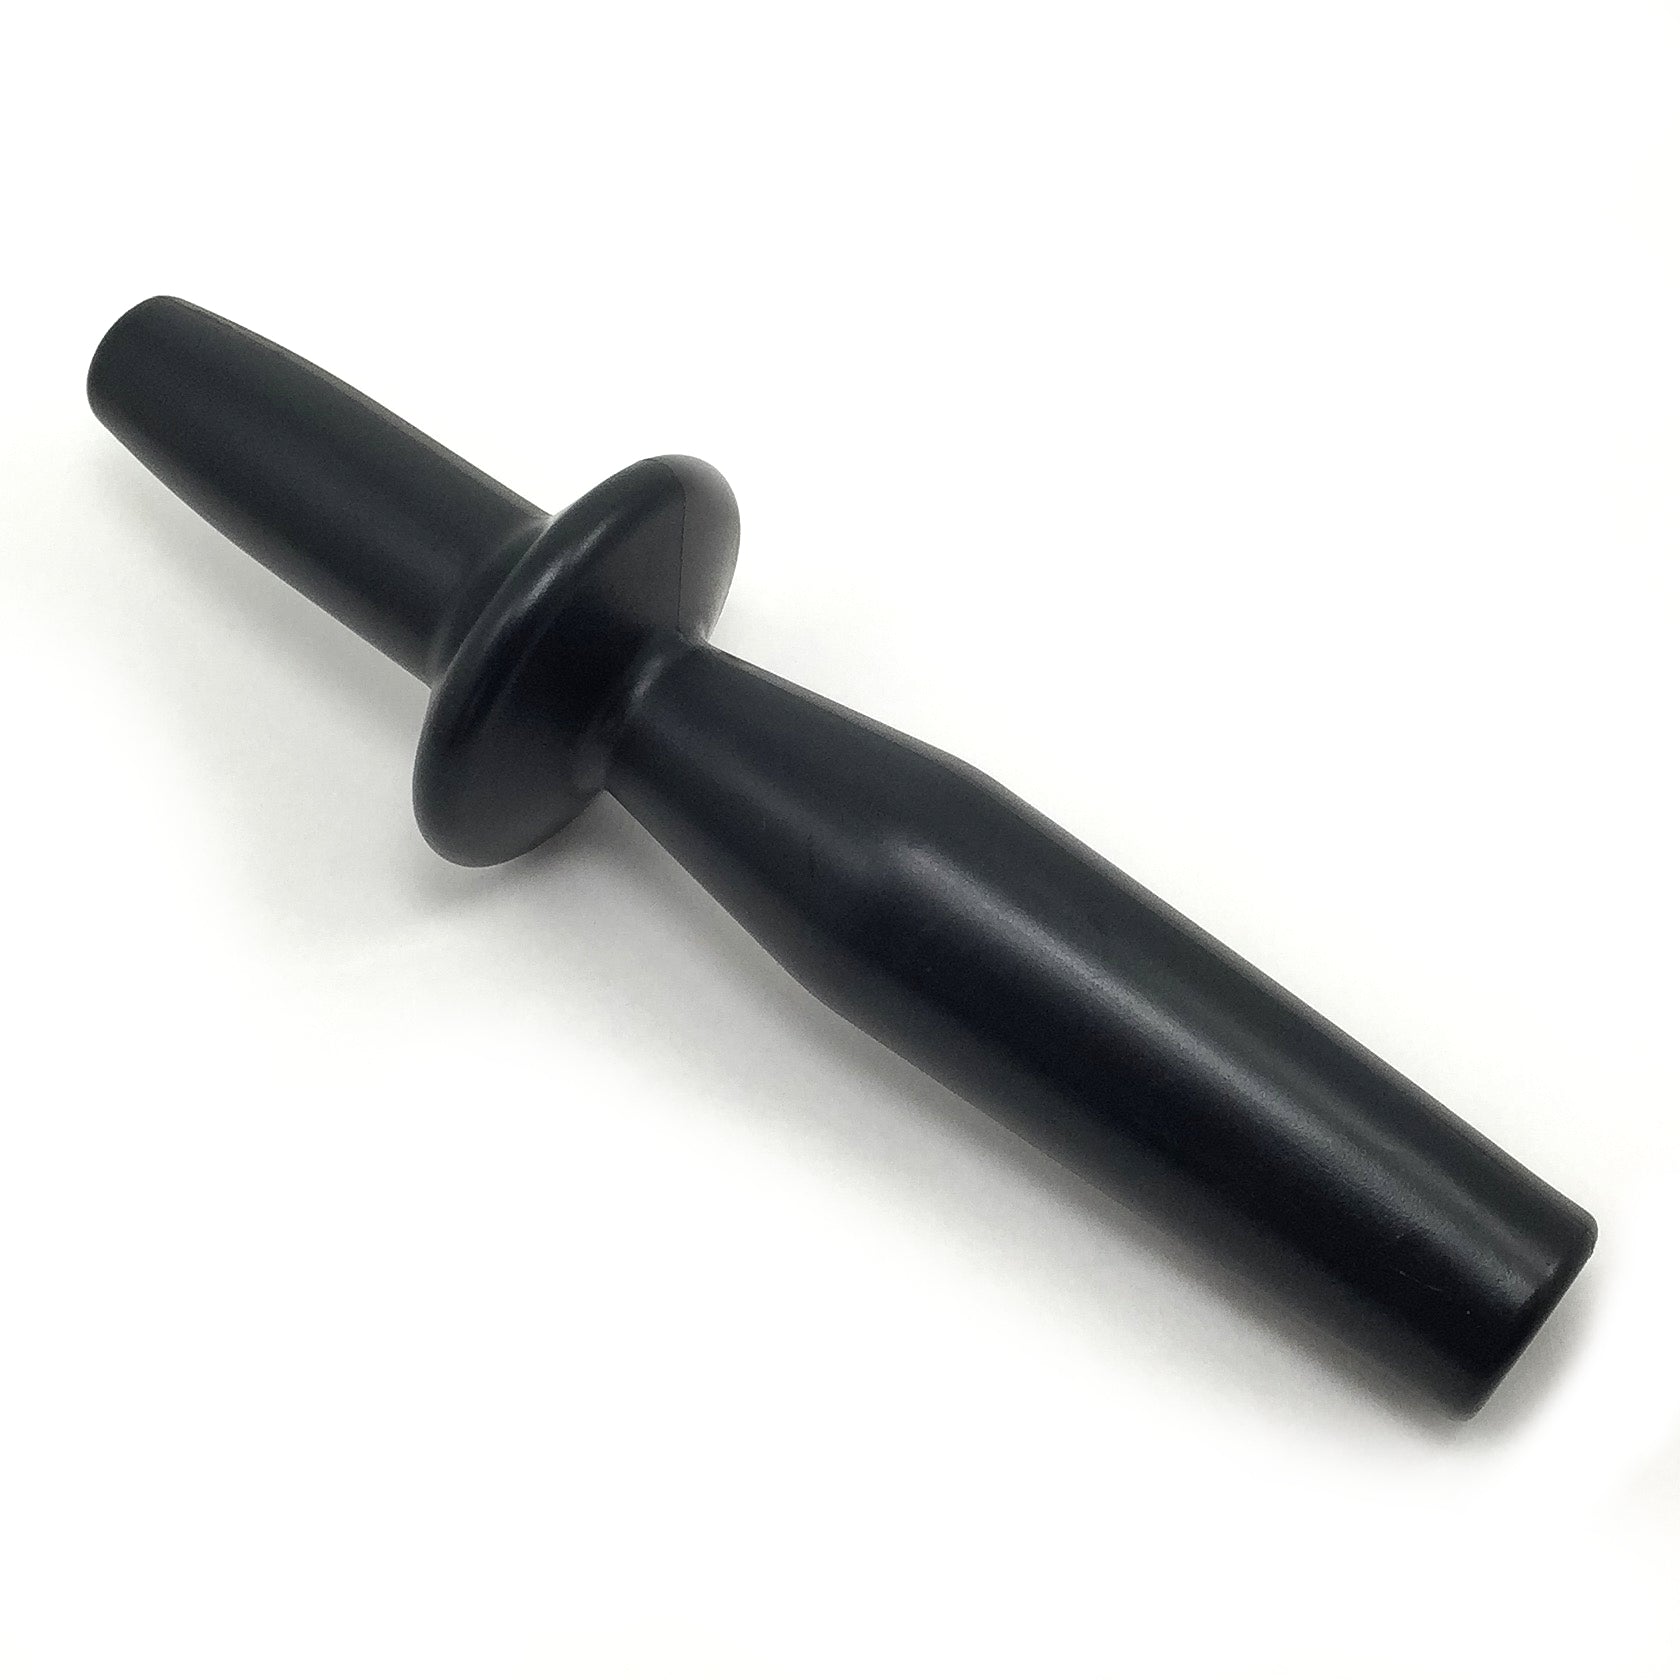 Heavy Duty Low-Profile Tamper for Vitamix Blenders